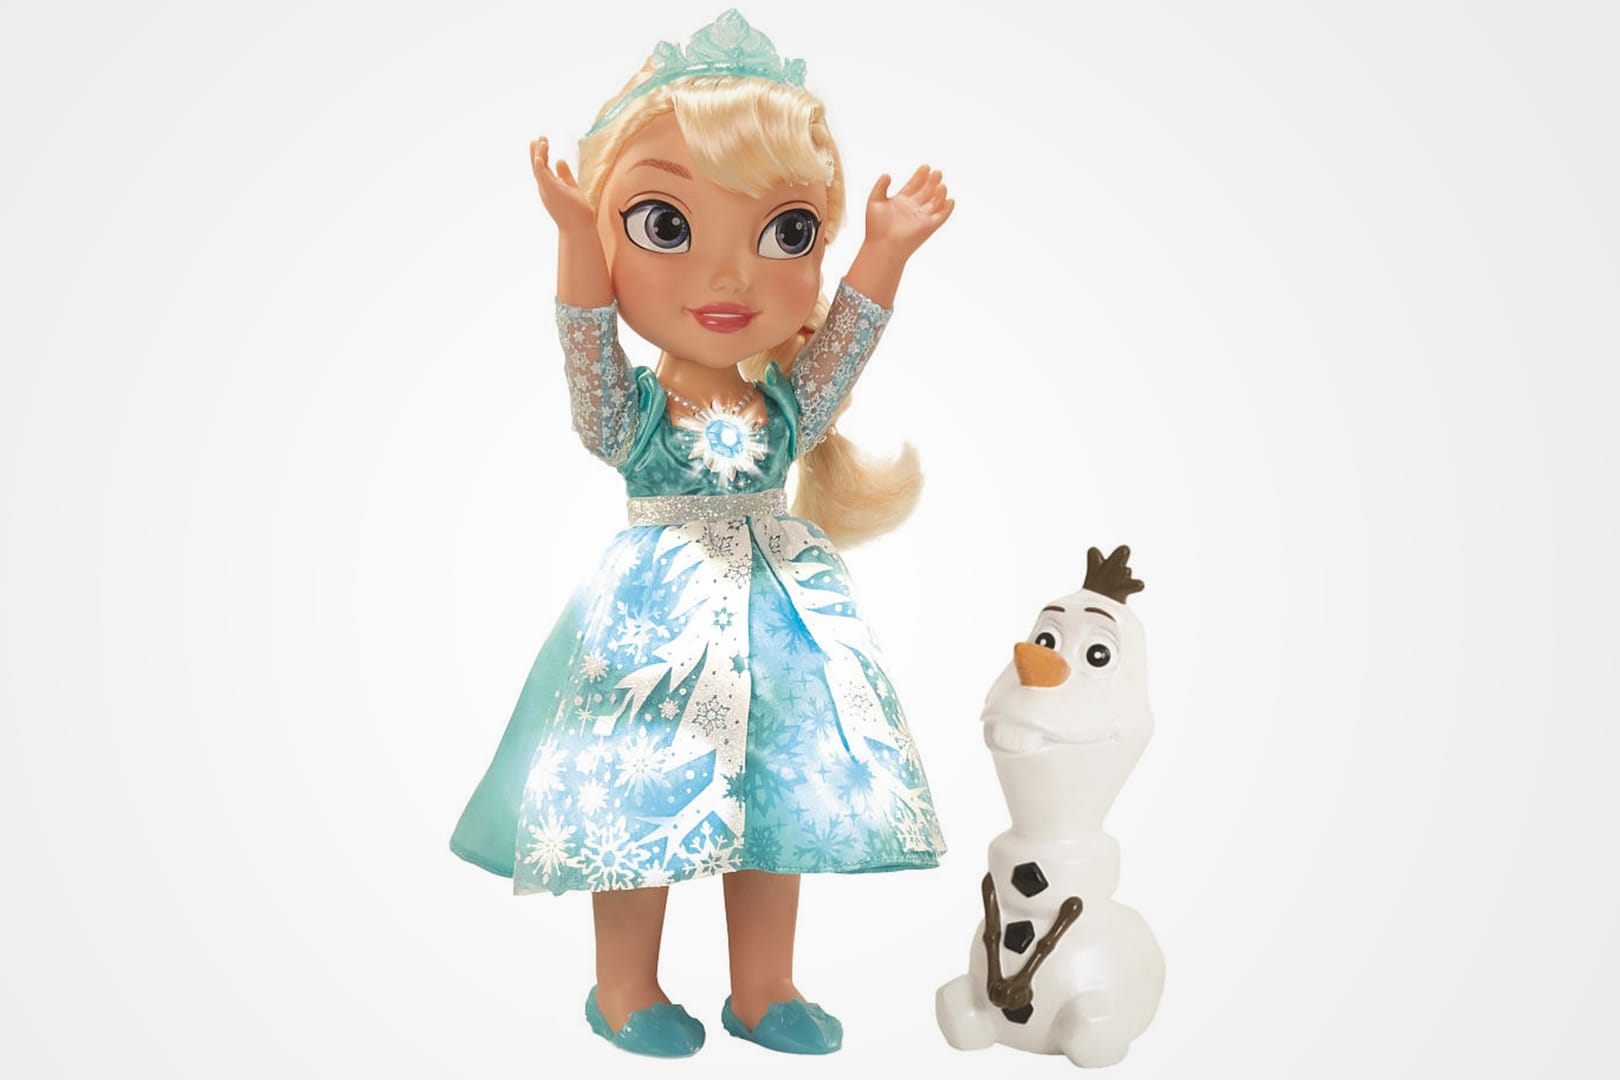 Wal-Mart bets these toys will make your kid's Christmas list